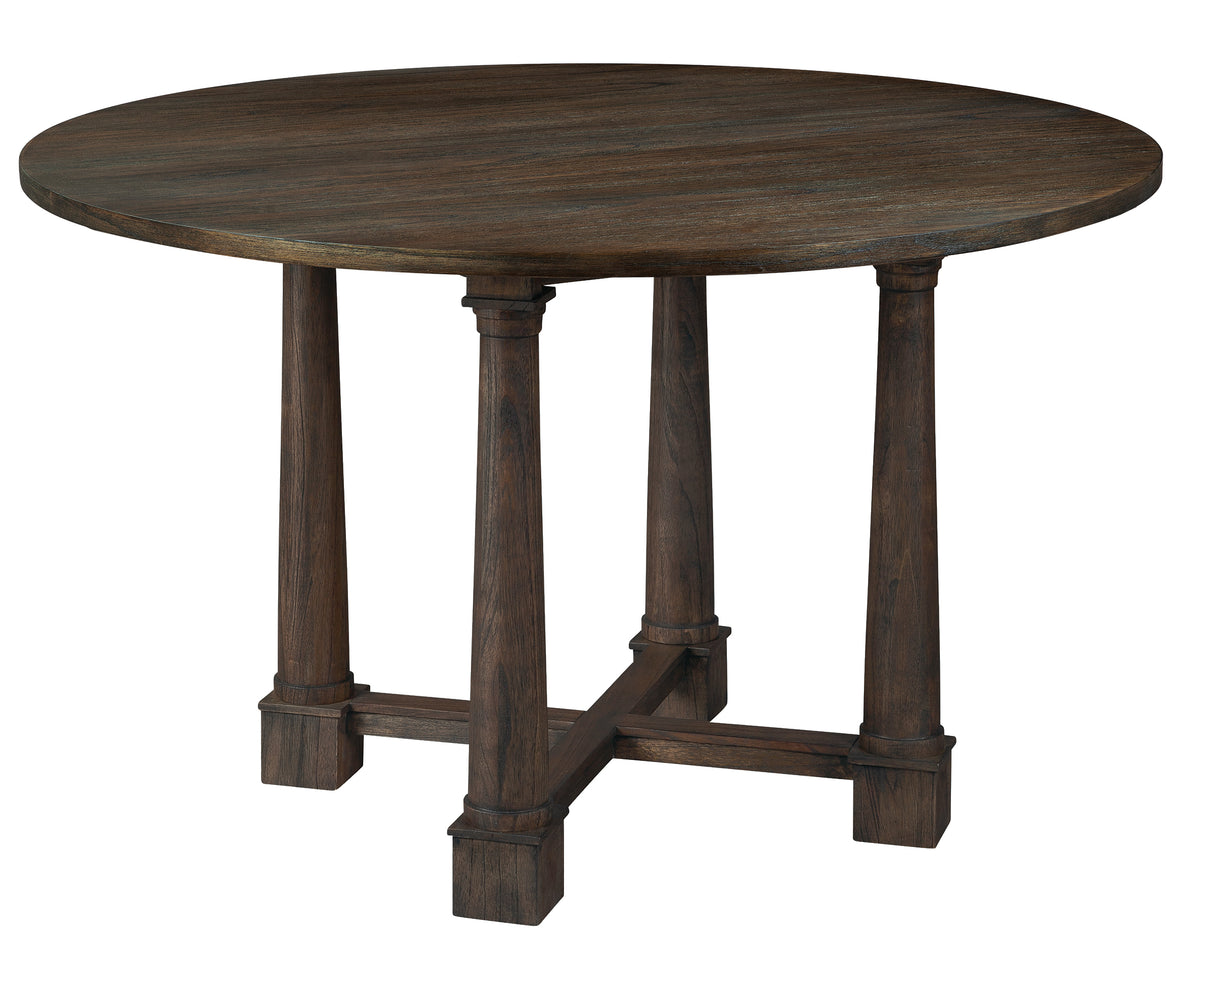 Hekman 25621 Linwood 47.75in. x 47.75in. x 30in. Dining Table